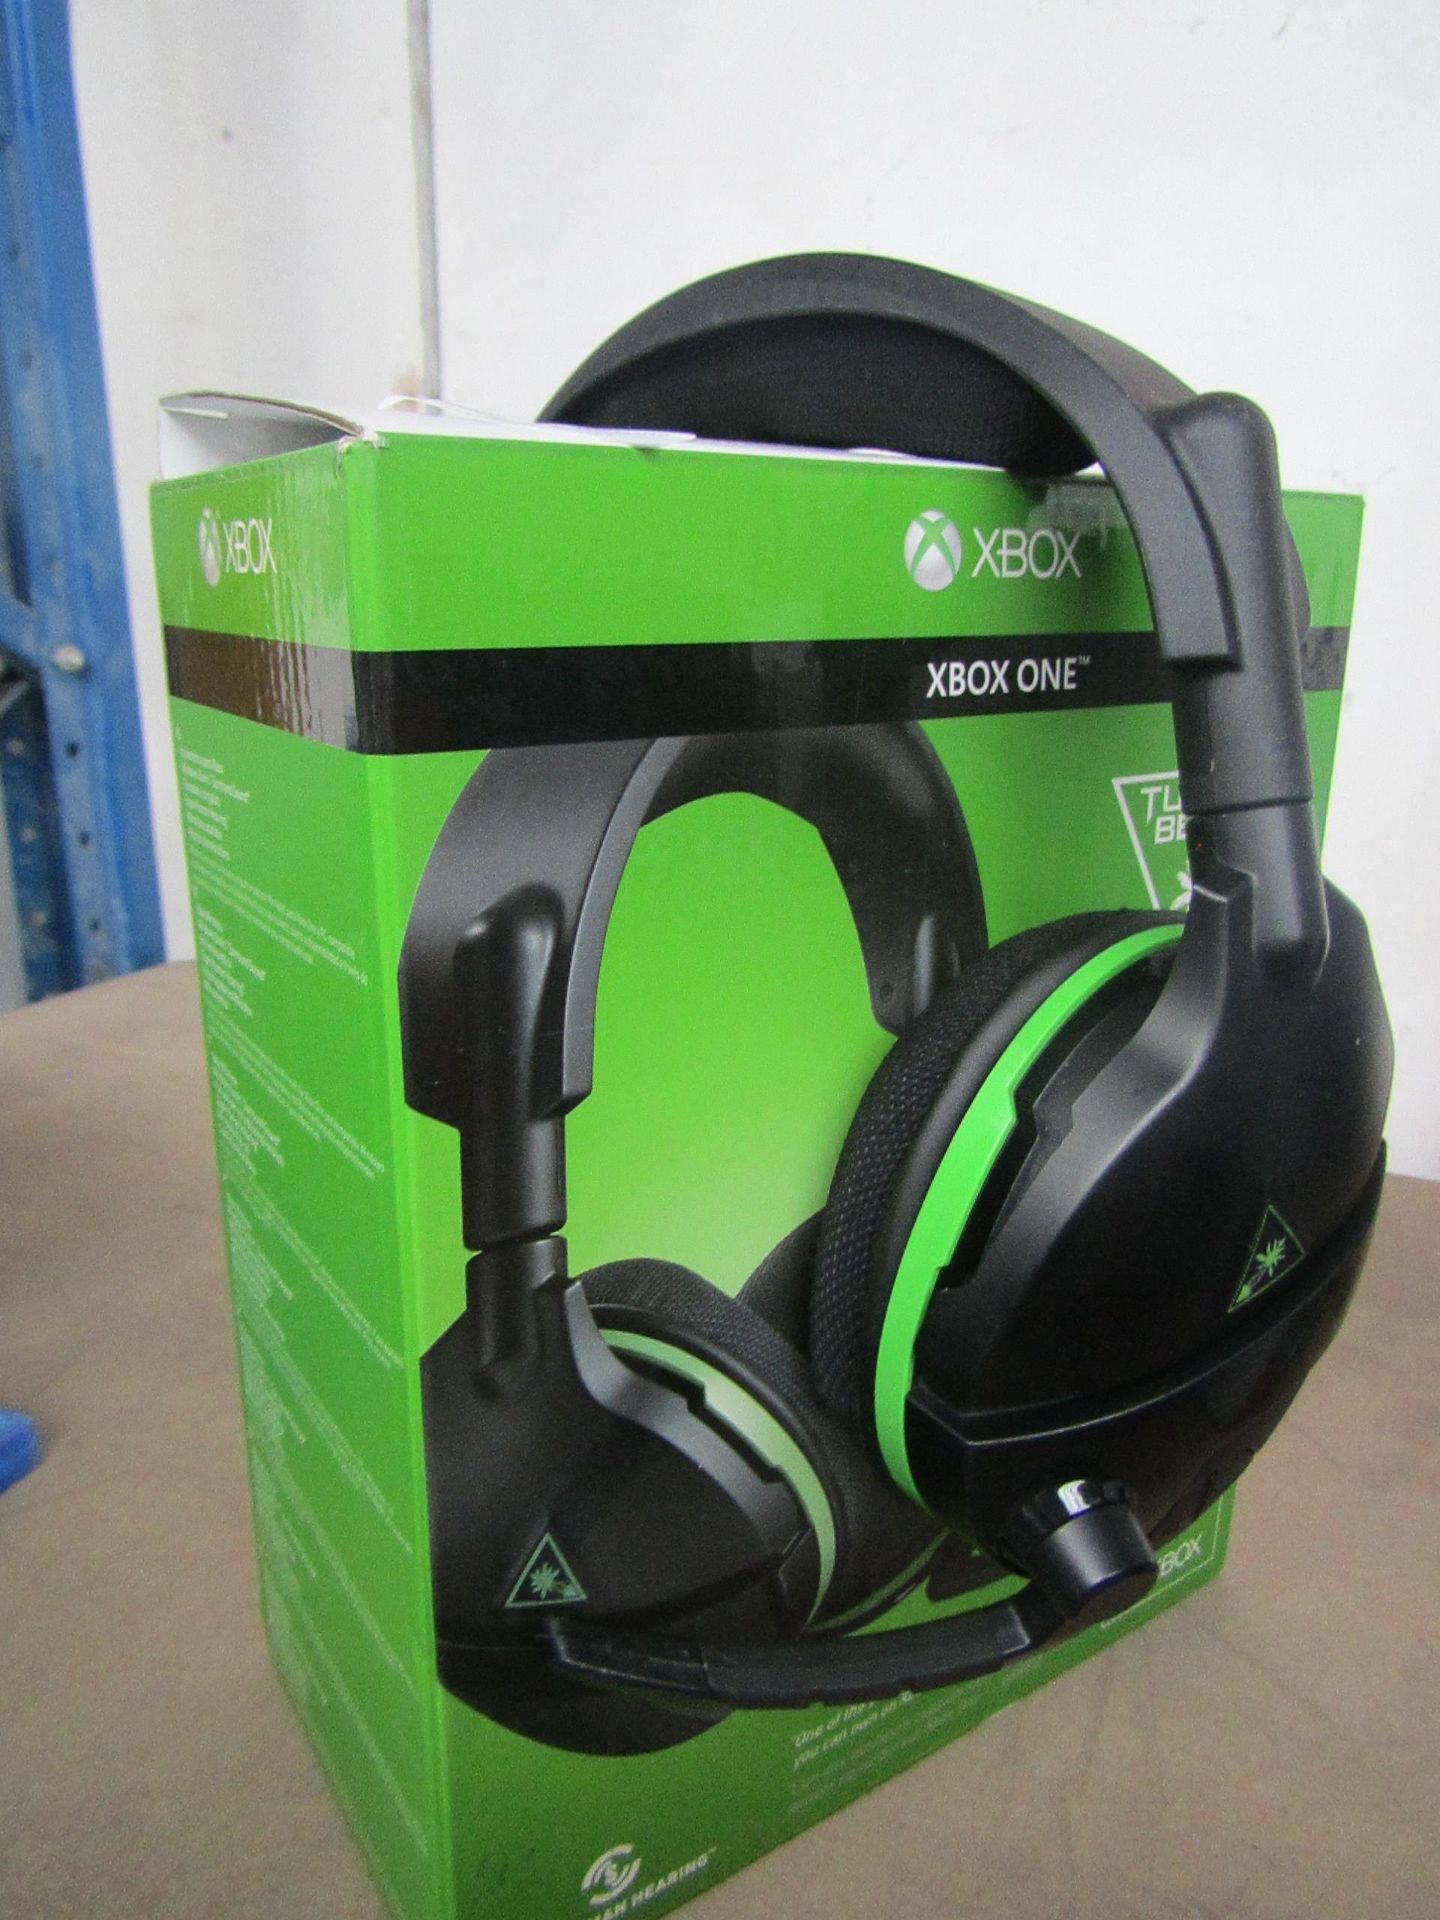 Turtle beach Stealth 600 gaming headset, unchecked and boxed, RRP £89.99